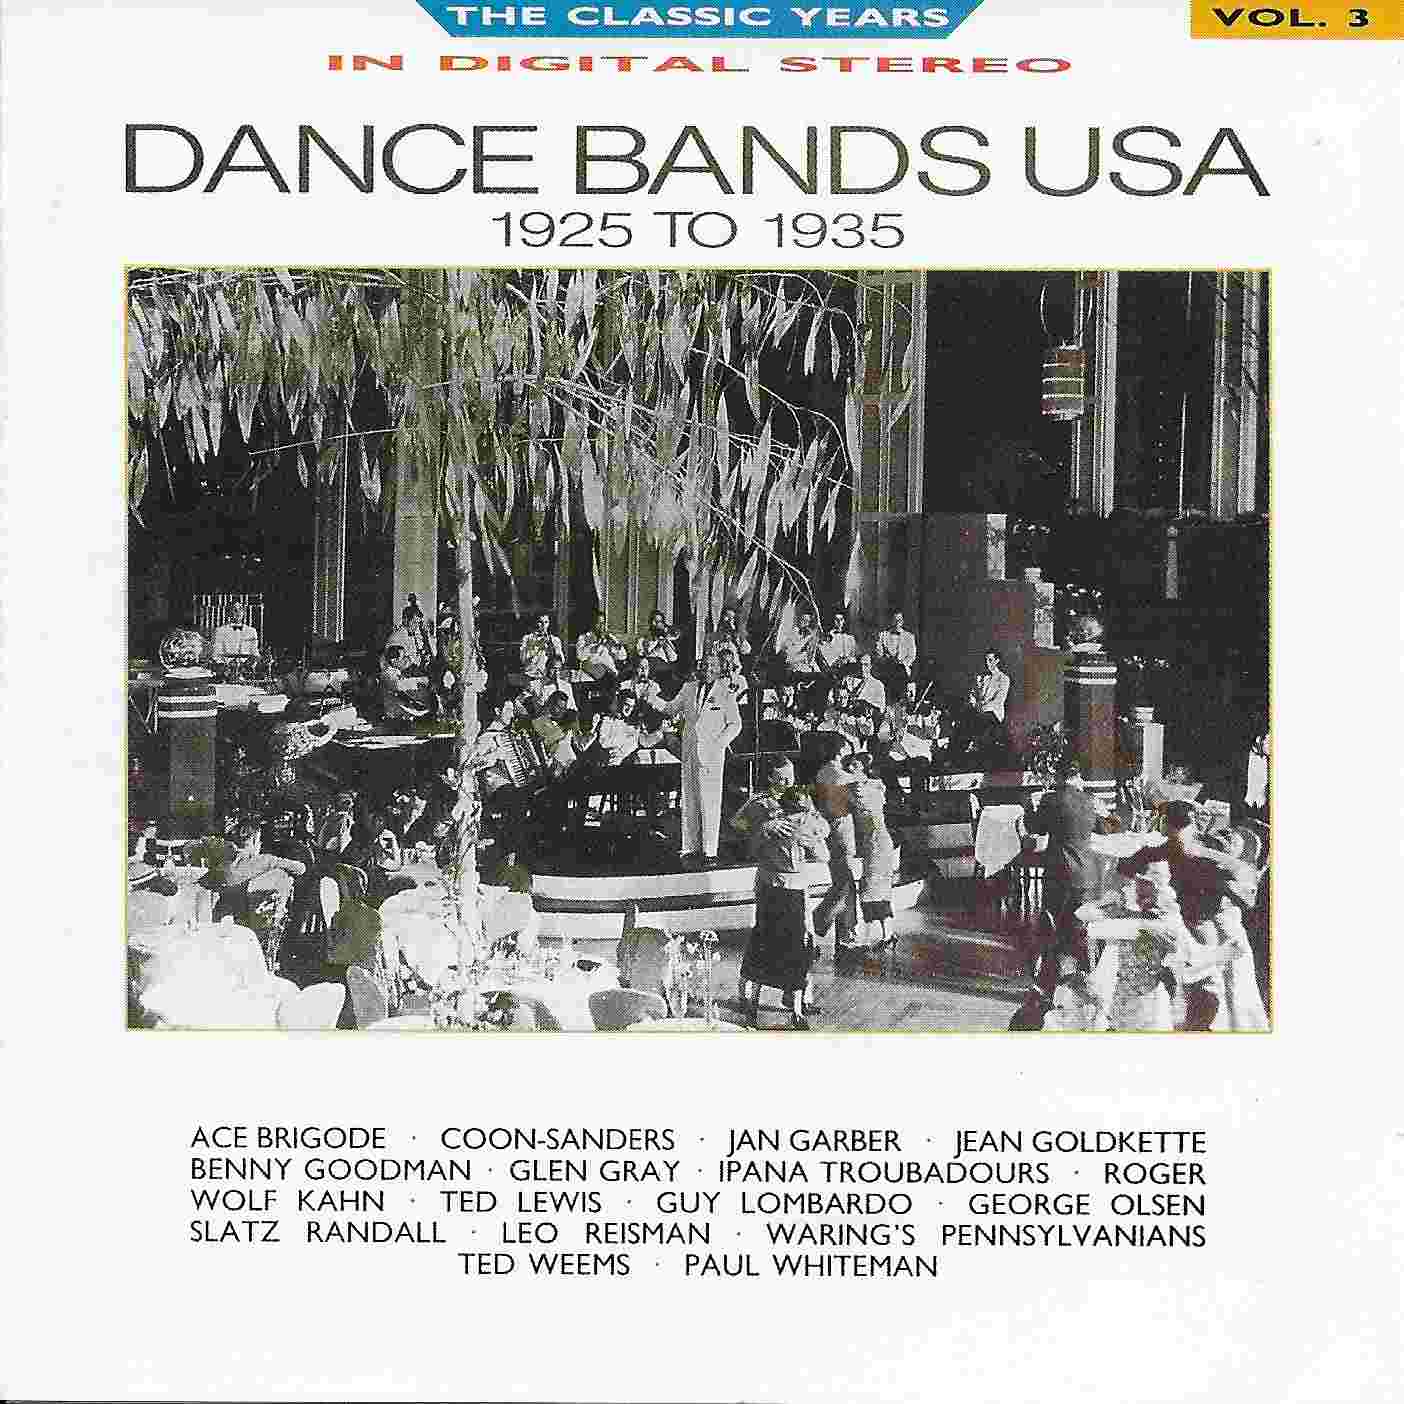 Picture of Classic years - Volume 3, Dance bands USA by artist Various from the BBC cds - Records and Tapes library